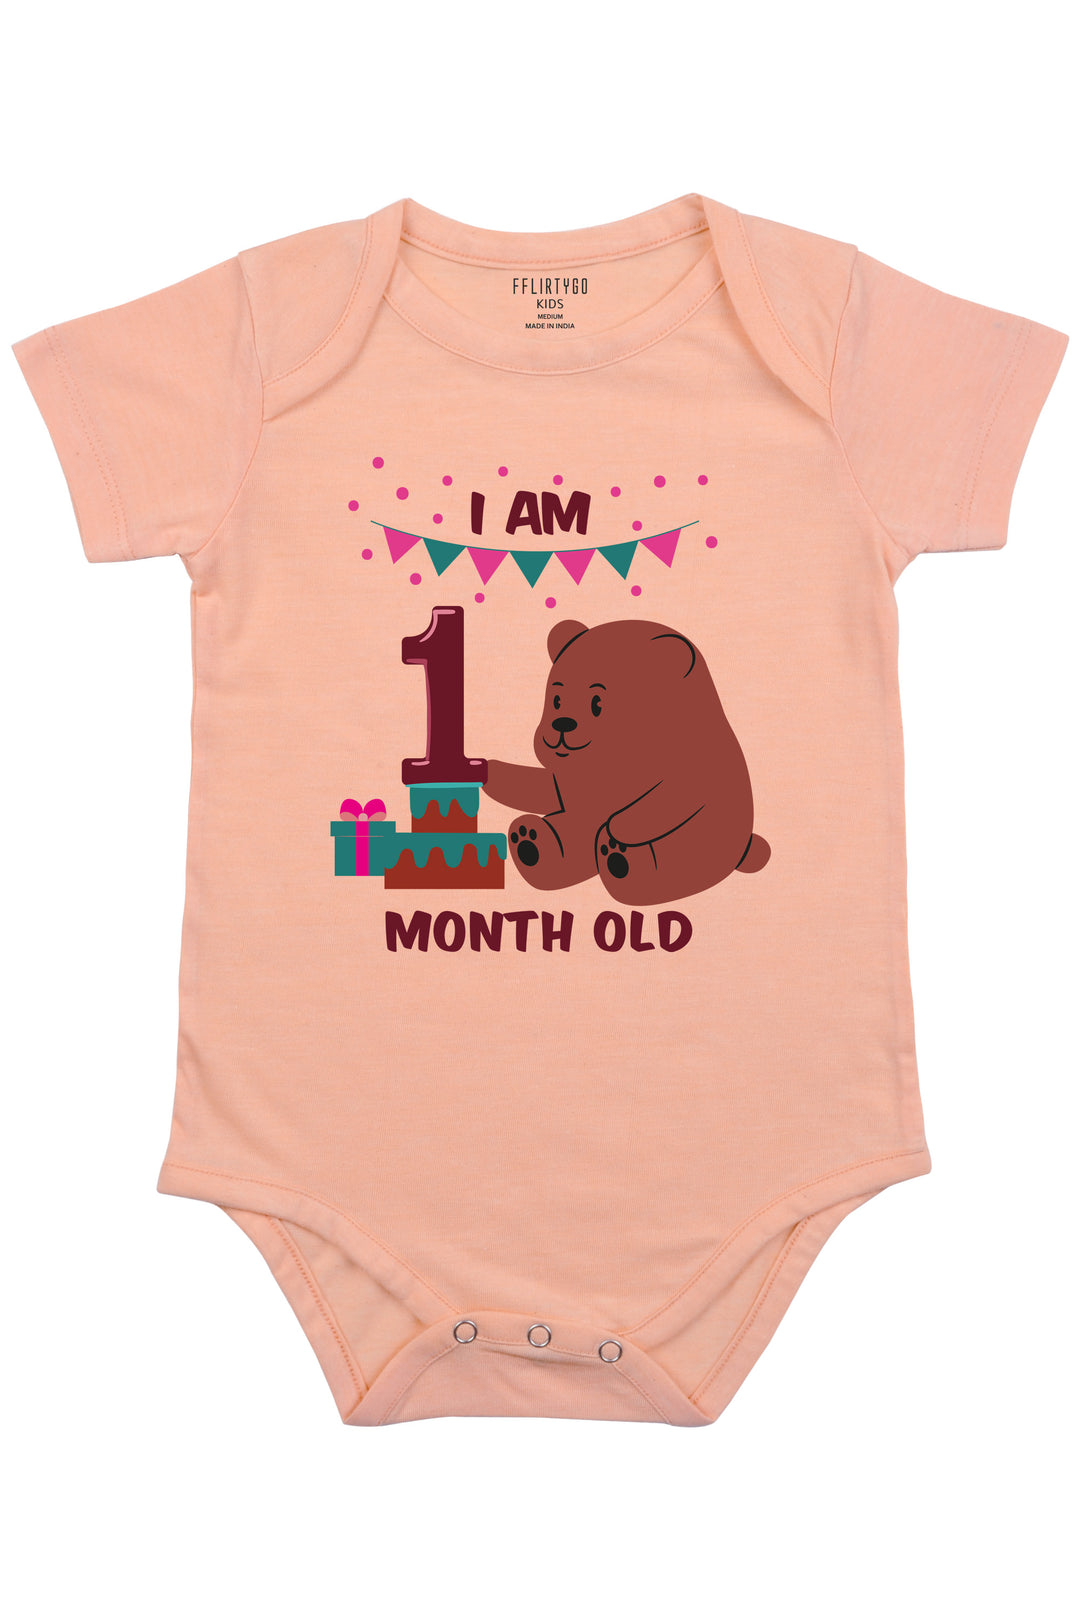 Shop onesies and baby rompers at Fflirtygo. Find baby rompers, including monthly milestone and cute bear onesies. Discover adorable options like peach color newborn rompers for your little one.